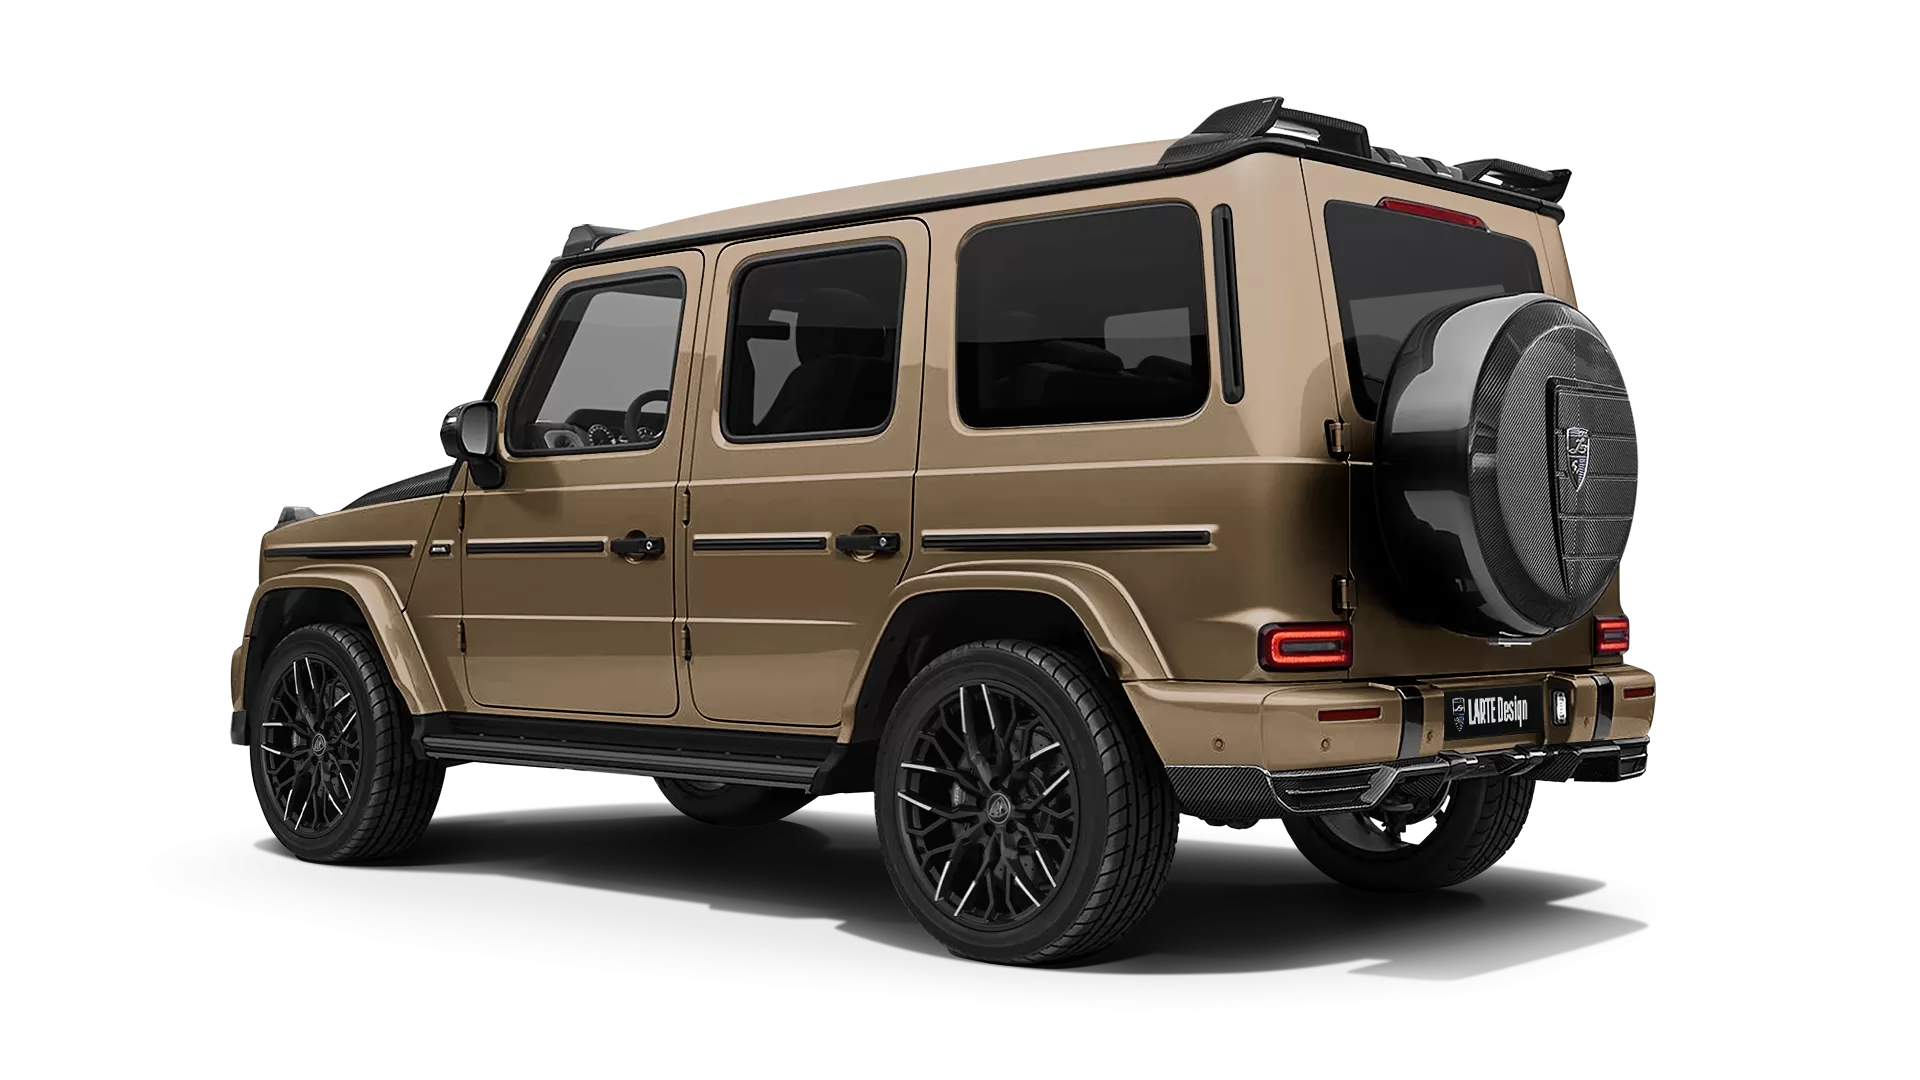 Mercedes G class W463 with carbon body kit: back view shown in Desert Sand